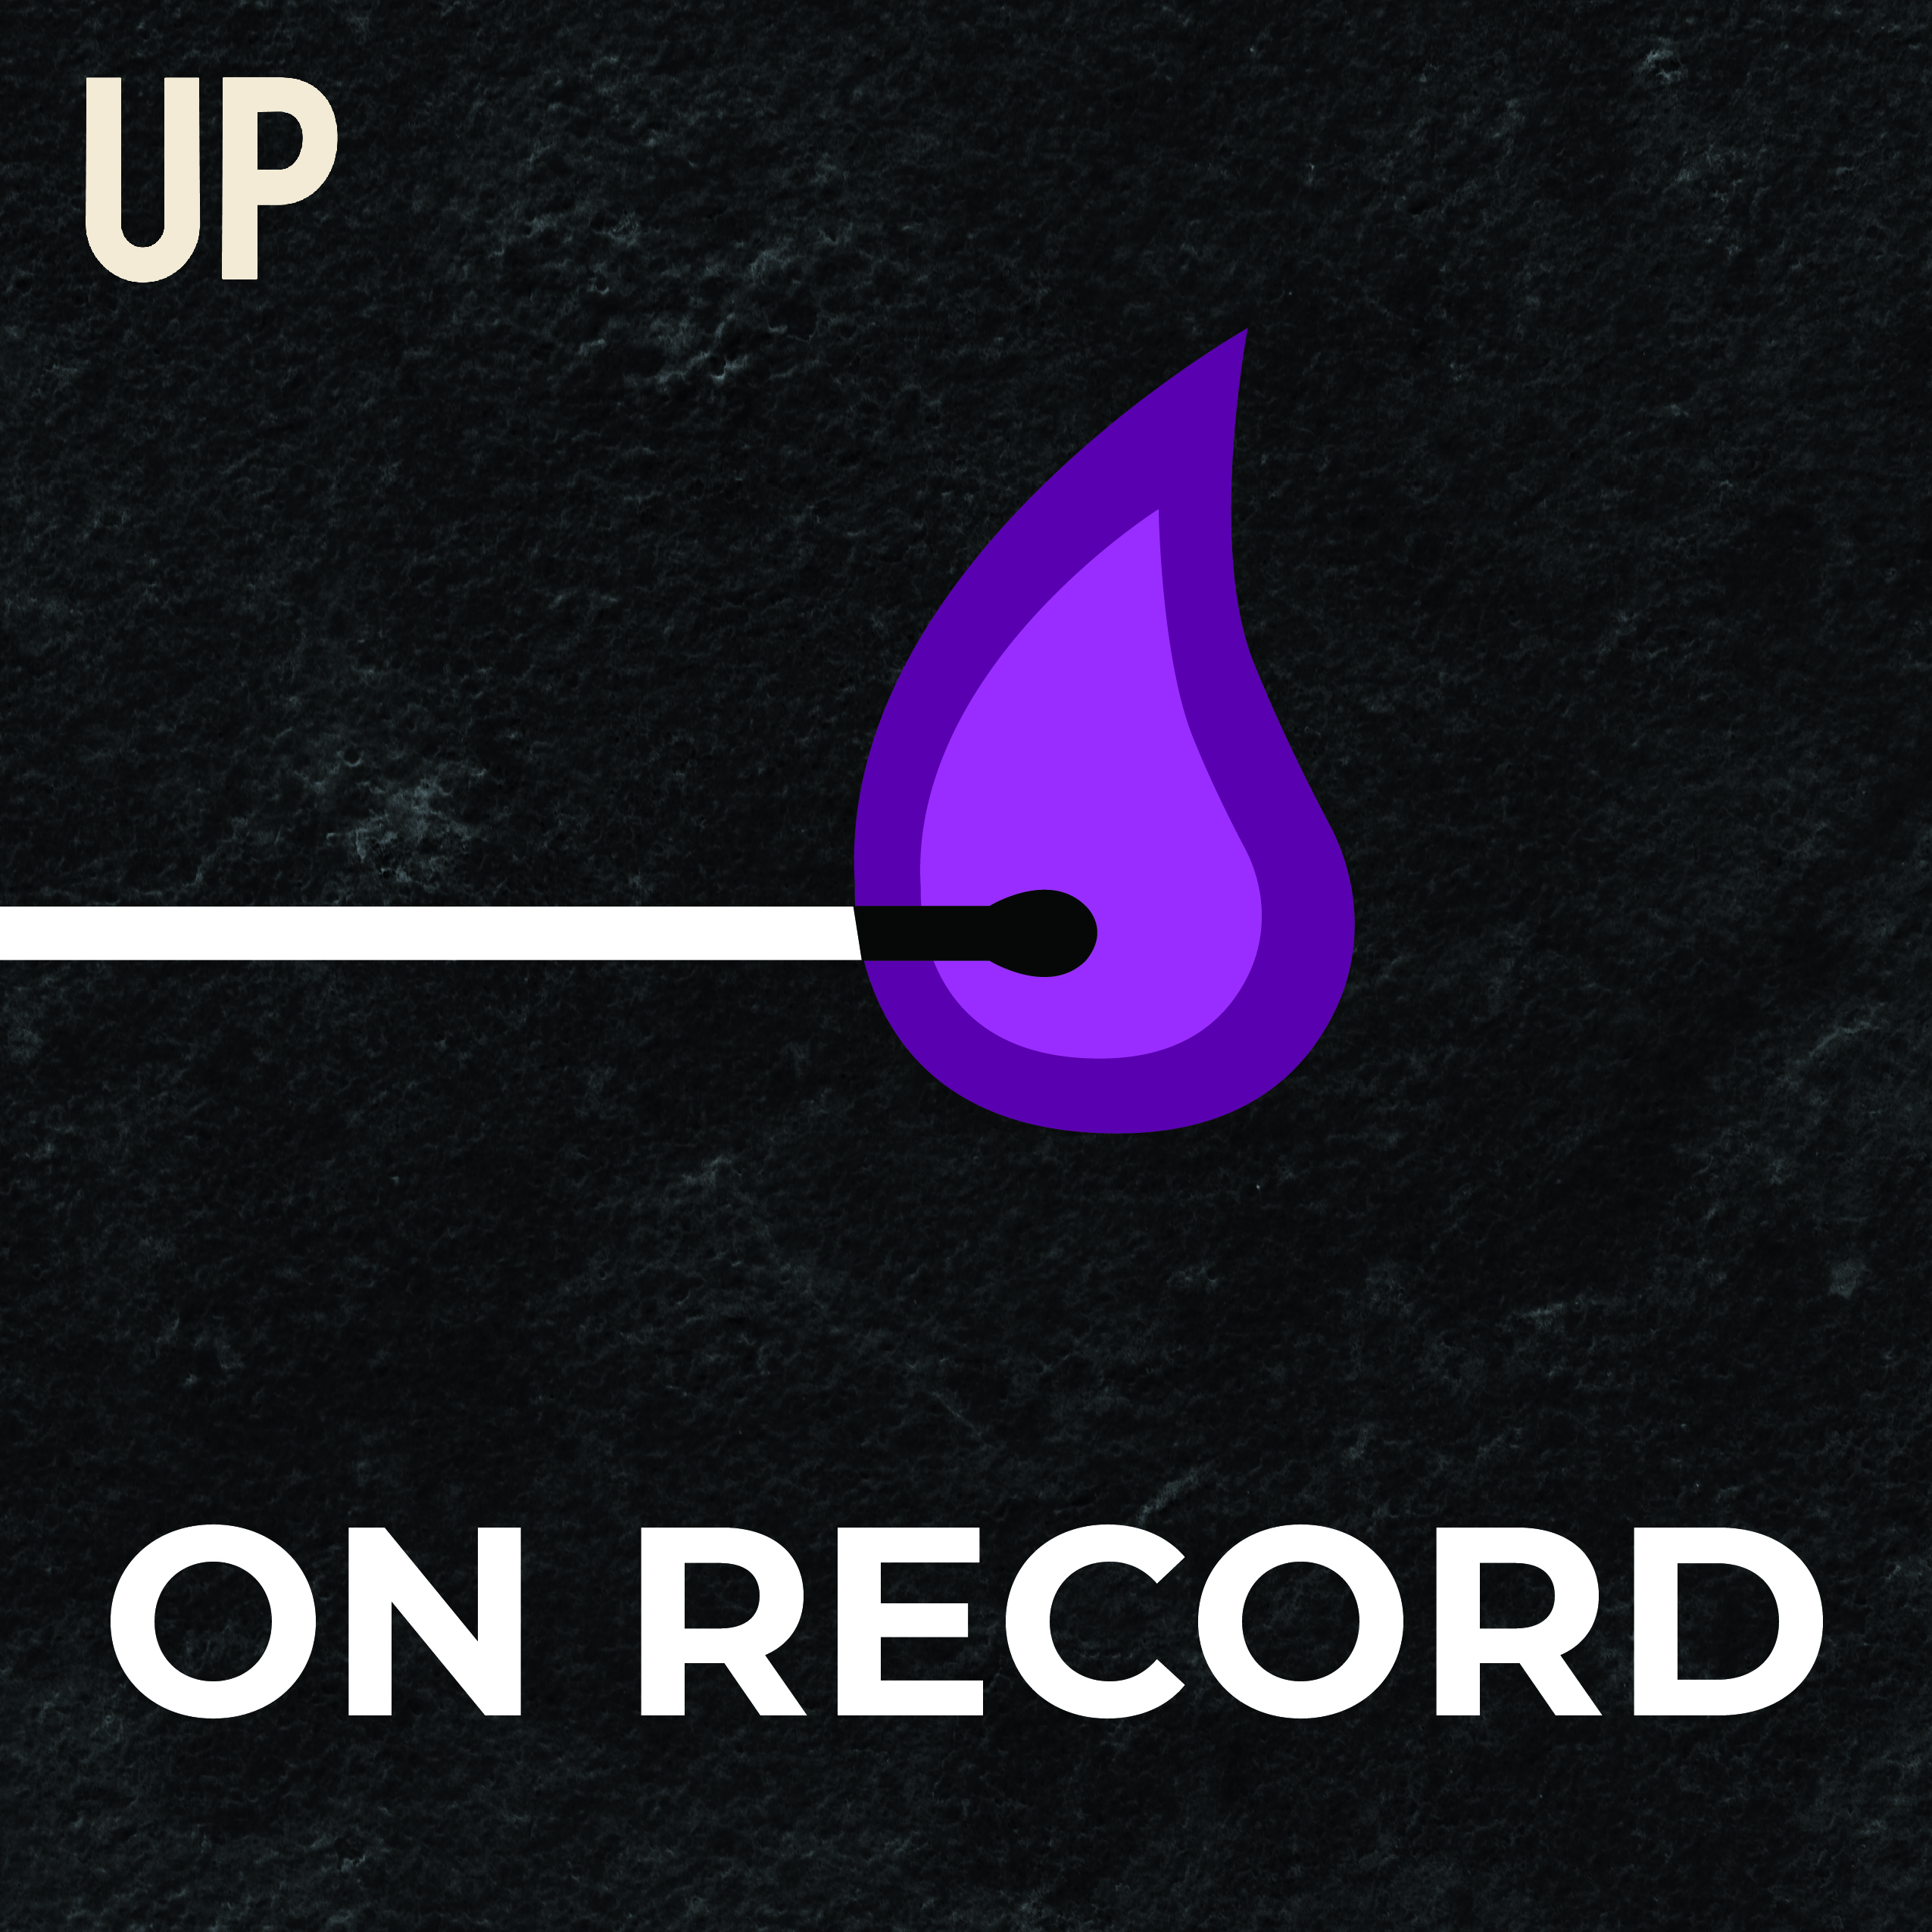 Graphic of a lit match with purple flames with text “On Record”